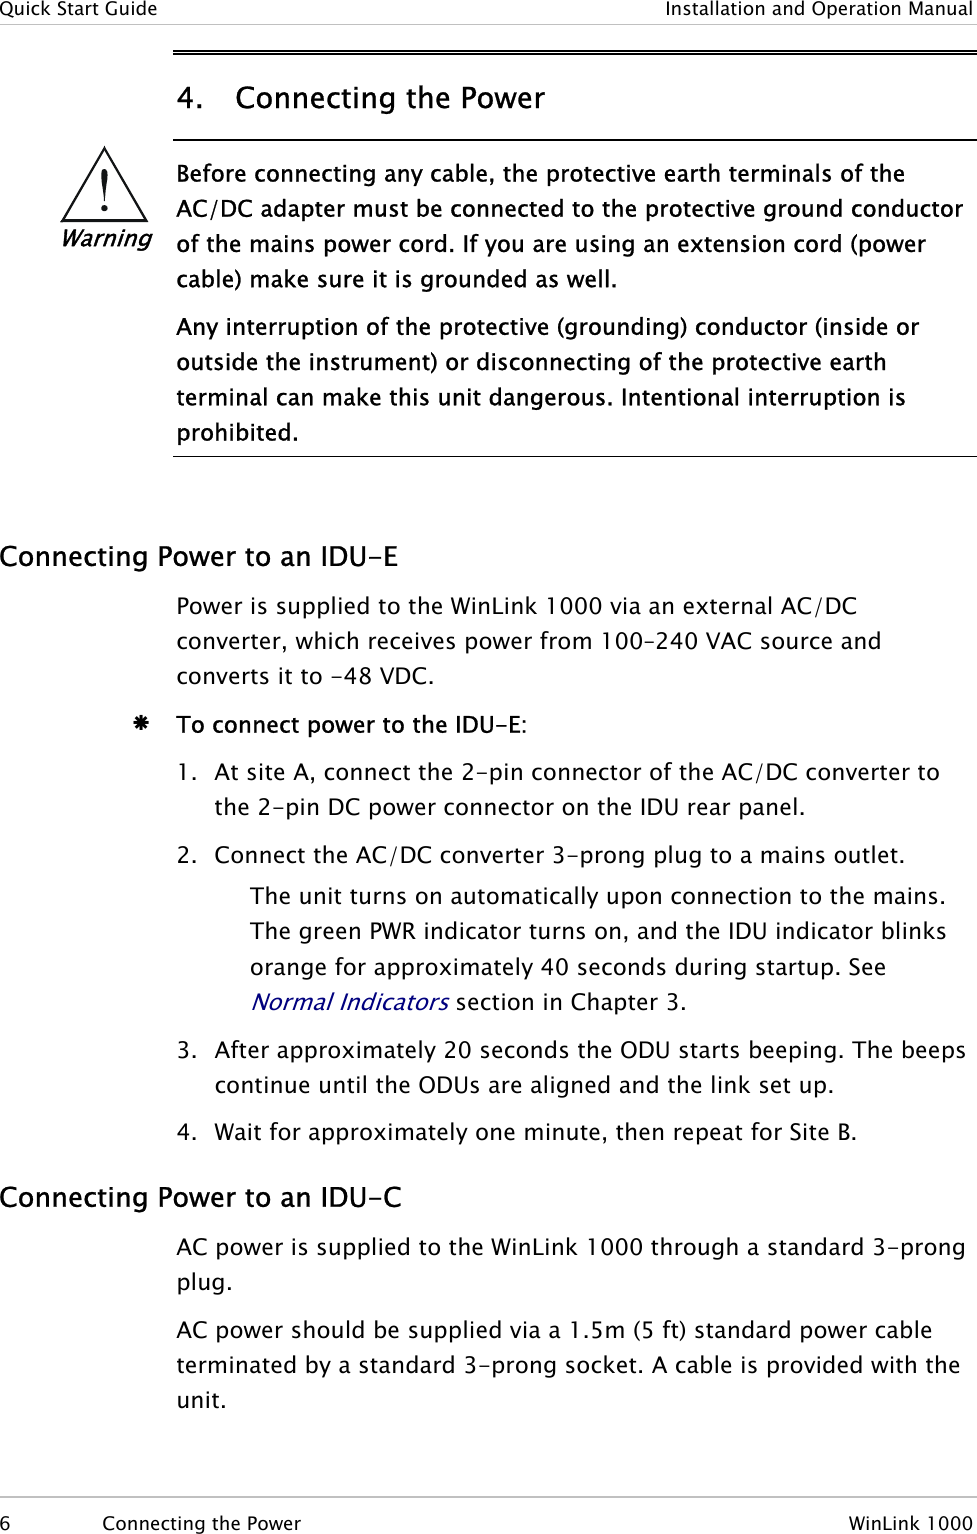 Quick Start Guide  Installation and Operation Manual 4. Connecting the Power  Warning Before connecting any cable, the protective earth terminals of the AC/DC adapter must be connected to the protective ground conductor of the mains power cord. If you are using an extension cord (power cable) make sure it is grounded as well. Any interruption of the protective (grounding) conductor (inside or outside the instrument) or disconnecting of the protective earth terminal can make this unit dangerous. Intentional interruption is prohibited.   Connecting Power to an IDU-E Power is supplied to the WinLink 1000 via an external AC/DC converter, which receives power from 100–240 VAC source and converts it to -48 VDC. Æ To connect power to the IDU-E: 1. At site A, connect the 2-pin connector of the AC/DC converter to the 2-pin DC power connector on the IDU rear panel.  2. Connect the AC/DC converter 3-prong plug to a mains outlet. The unit turns on automatically upon connection to the mains. The green PWR indicator turns on, and the IDU indicator blinks orange for approximately 40 seconds during startup. See Normal Indicators section in Chapter 3. 3. After approximately 20 seconds the ODU starts beeping. The beeps continue until the ODUs are aligned and the link set up. 4. Wait for approximately one minute, then repeat for Site B. Connecting Power to an IDU-C AC power is supplied to the WinLink 1000 through a standard 3-prong plug.  AC power should be supplied via a 1.5m (5 ft) standard power cable terminated by a standard 3-prong socket. A cable is provided with the unit. 6  Connecting the Power  WinLink 1000 